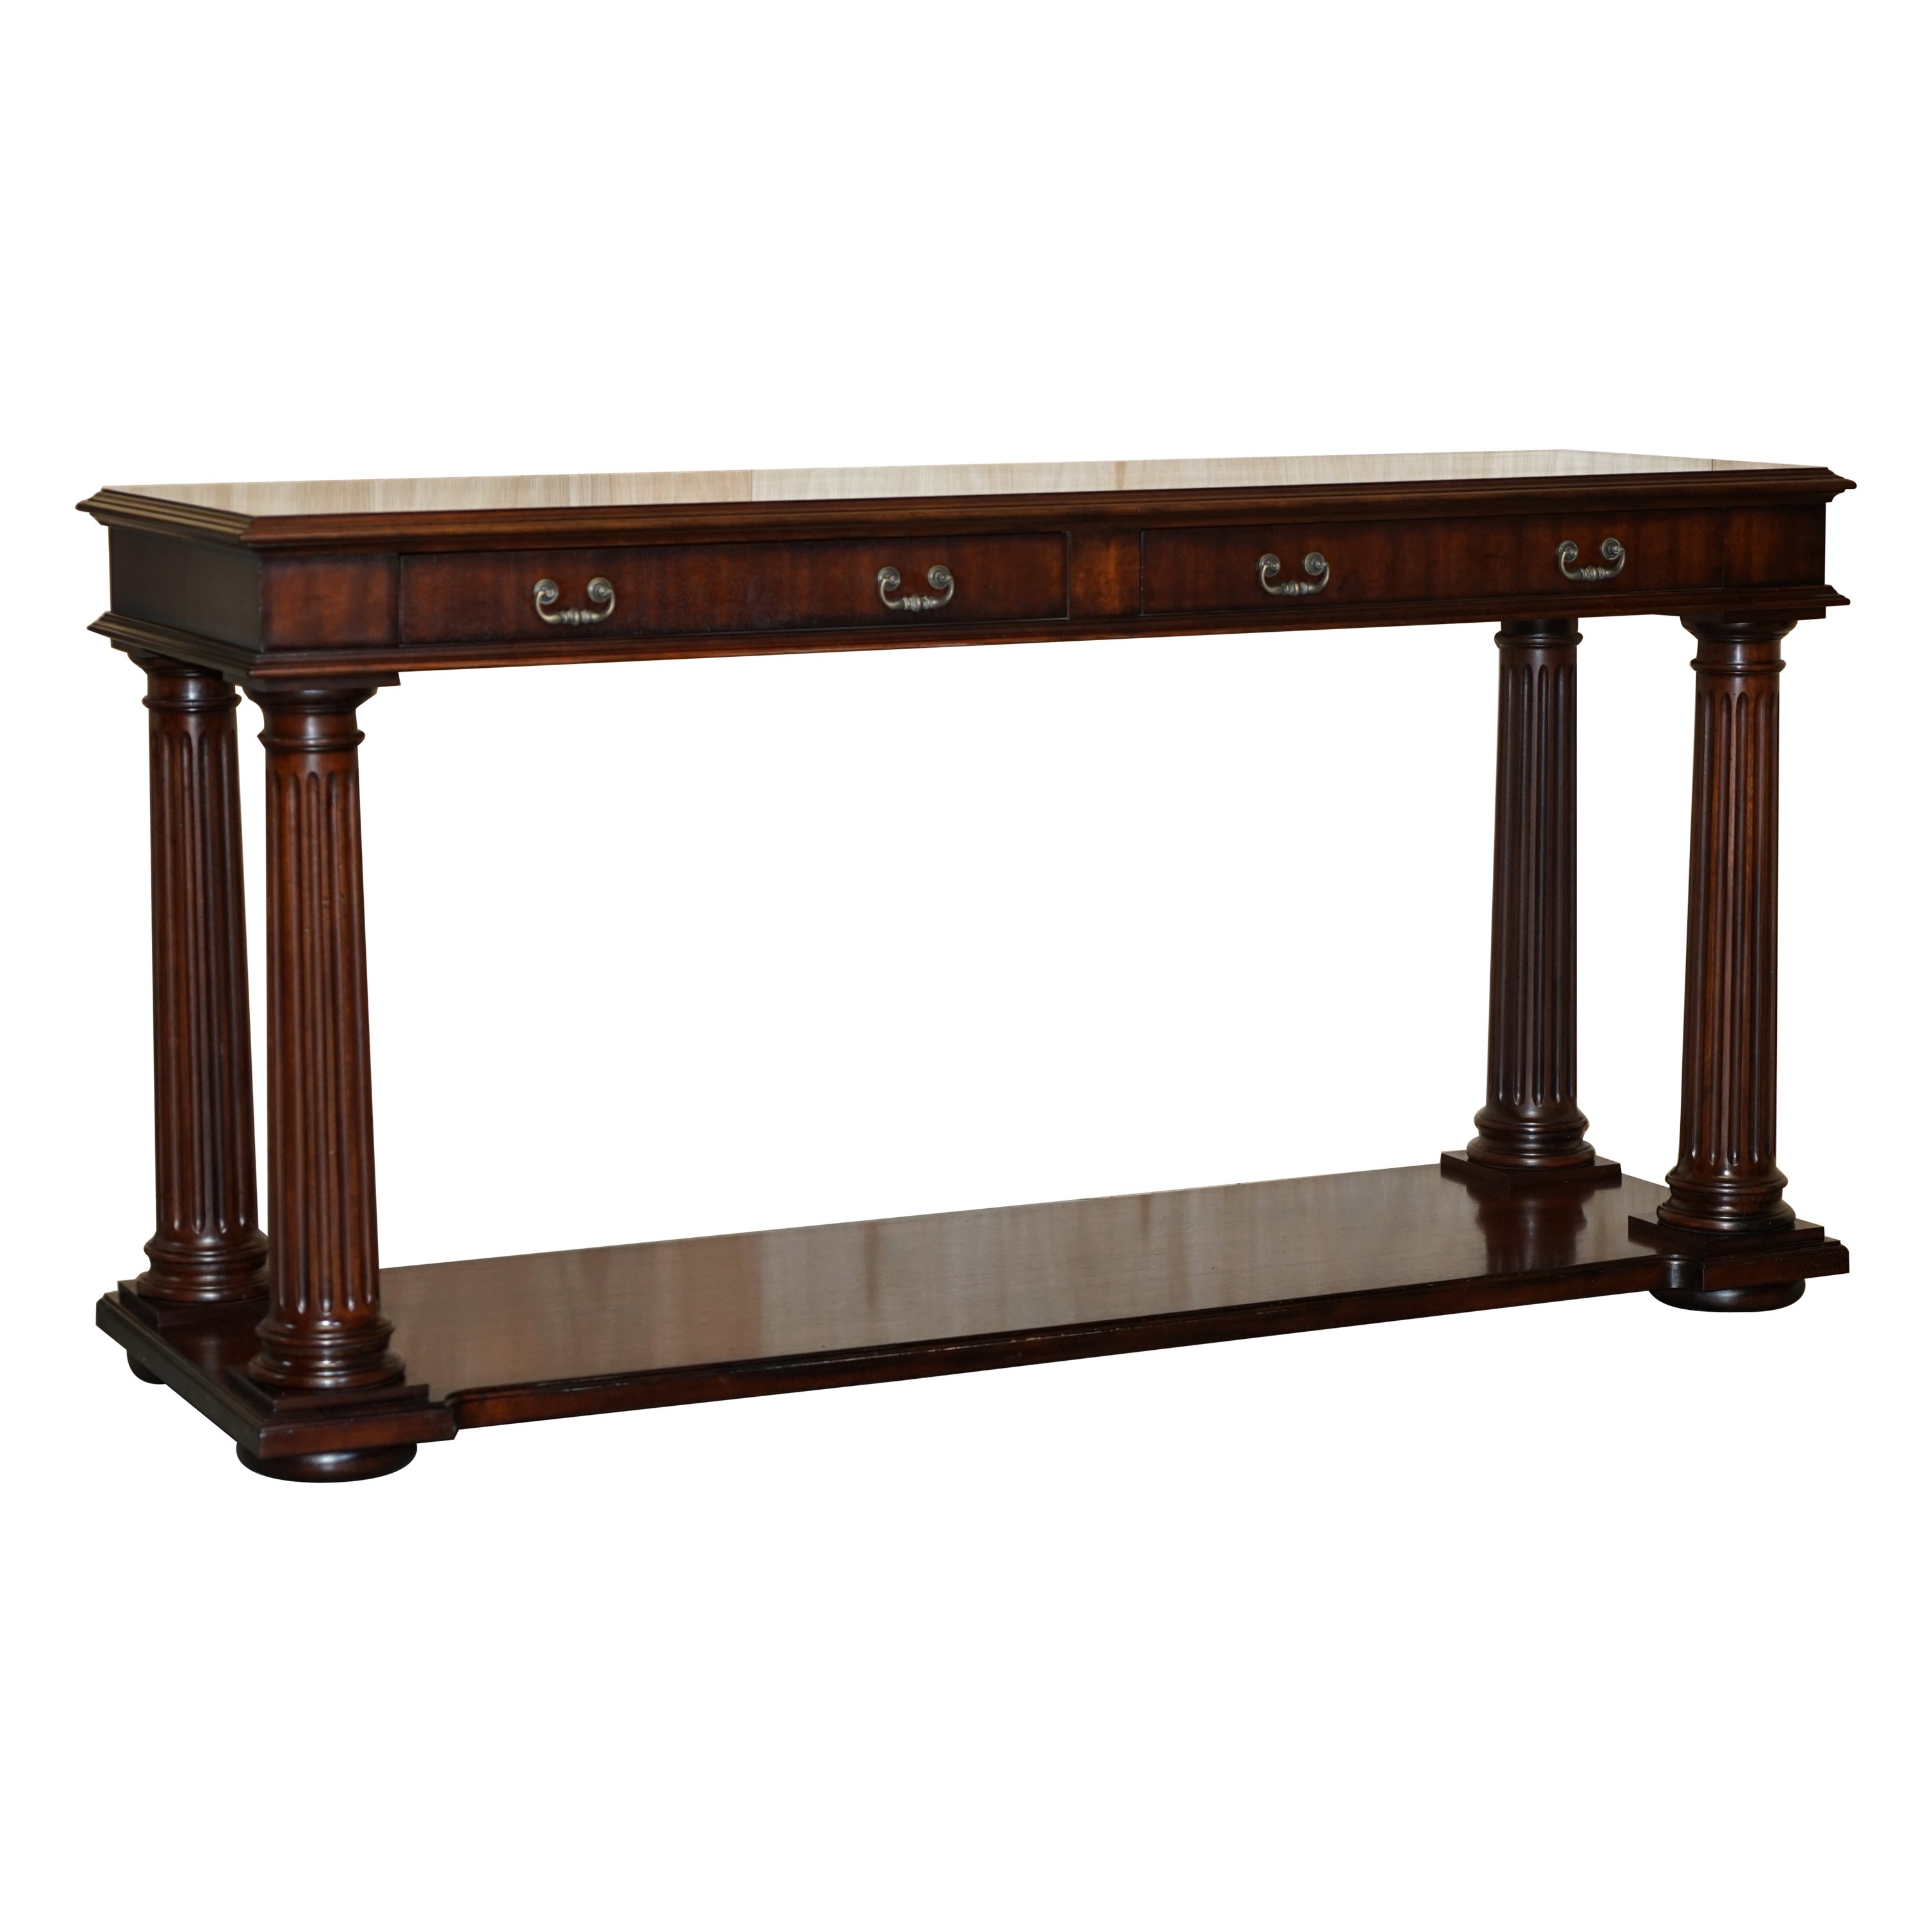 Stunning Ralph Lauren Hand Carved American Hardwood Console Table Sideboard For Sale